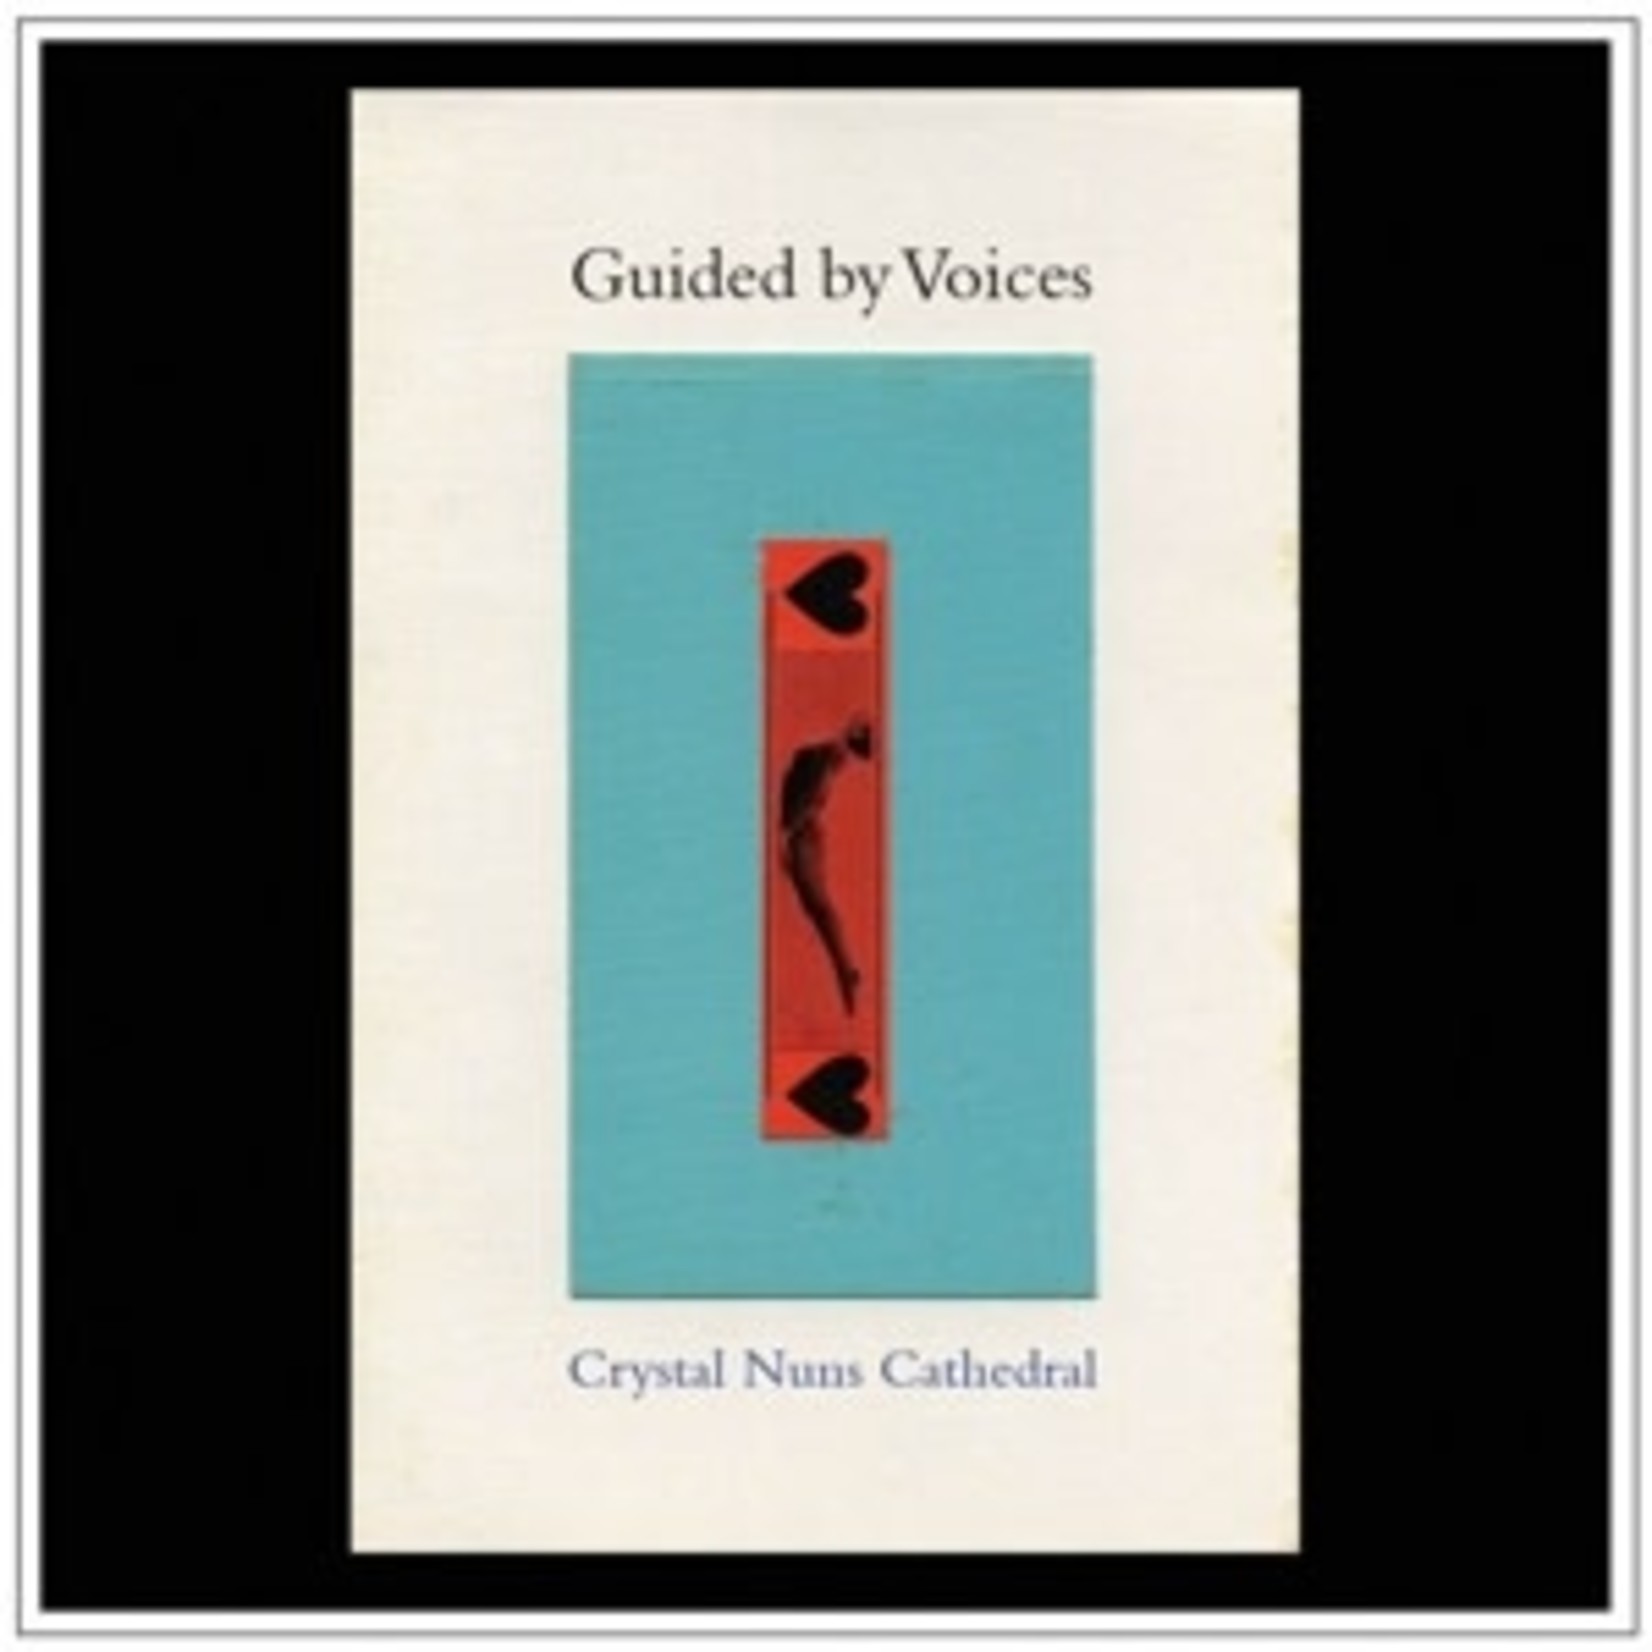 GUIDED BY VOICES - CRYSTAL NUNS CATHEDRAL (VINYL)